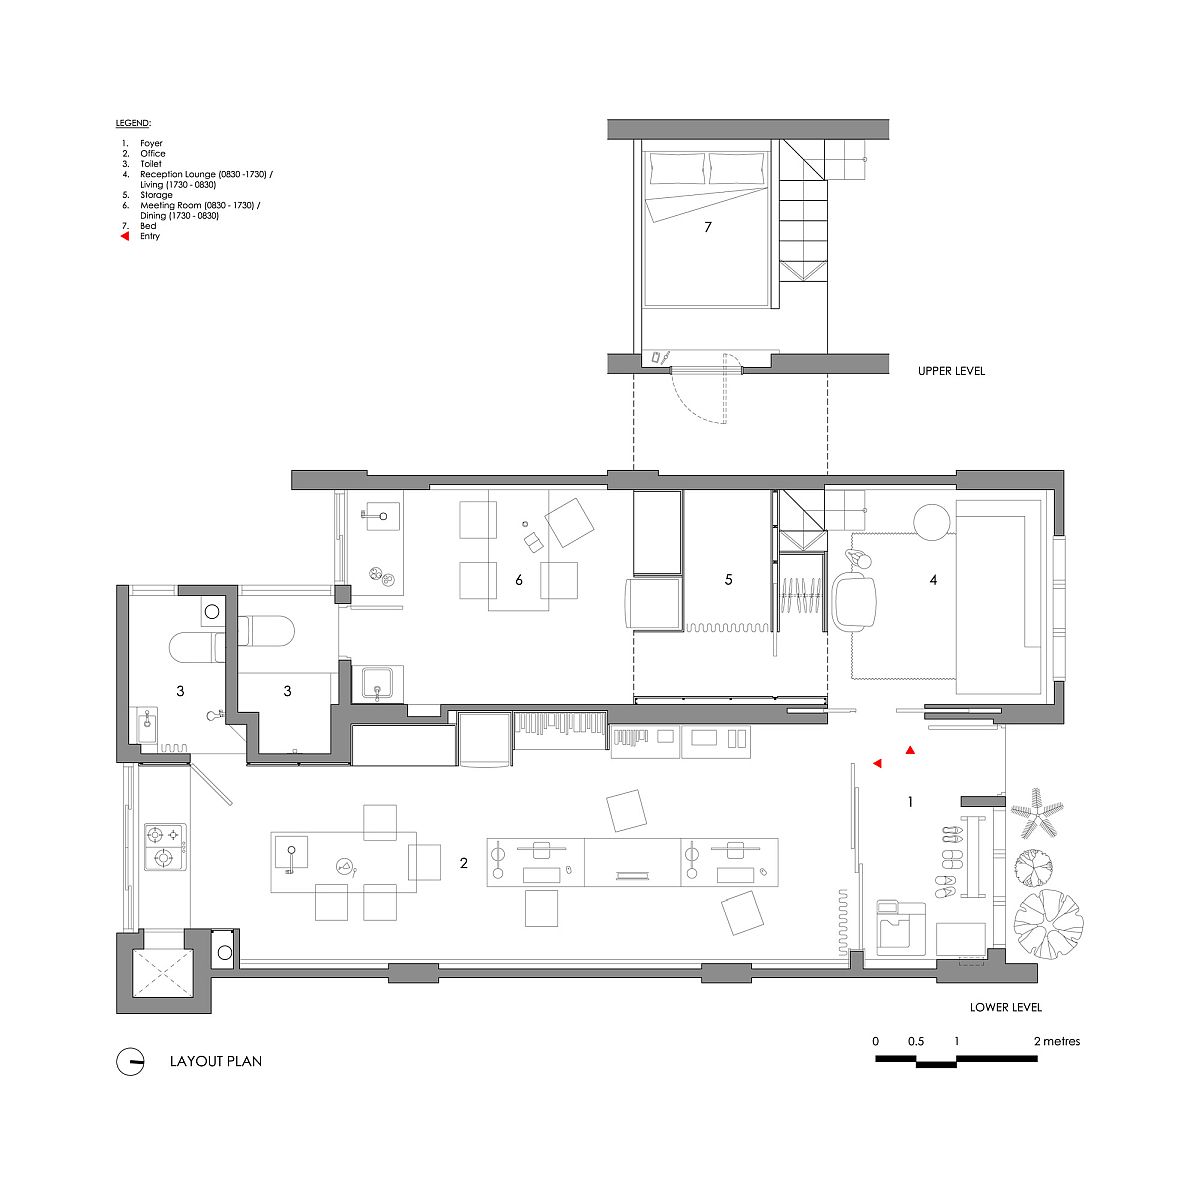 Design-plan-and-layout-of-Apartment-Renovation-in-Singapore-inside-HDB-building-90583